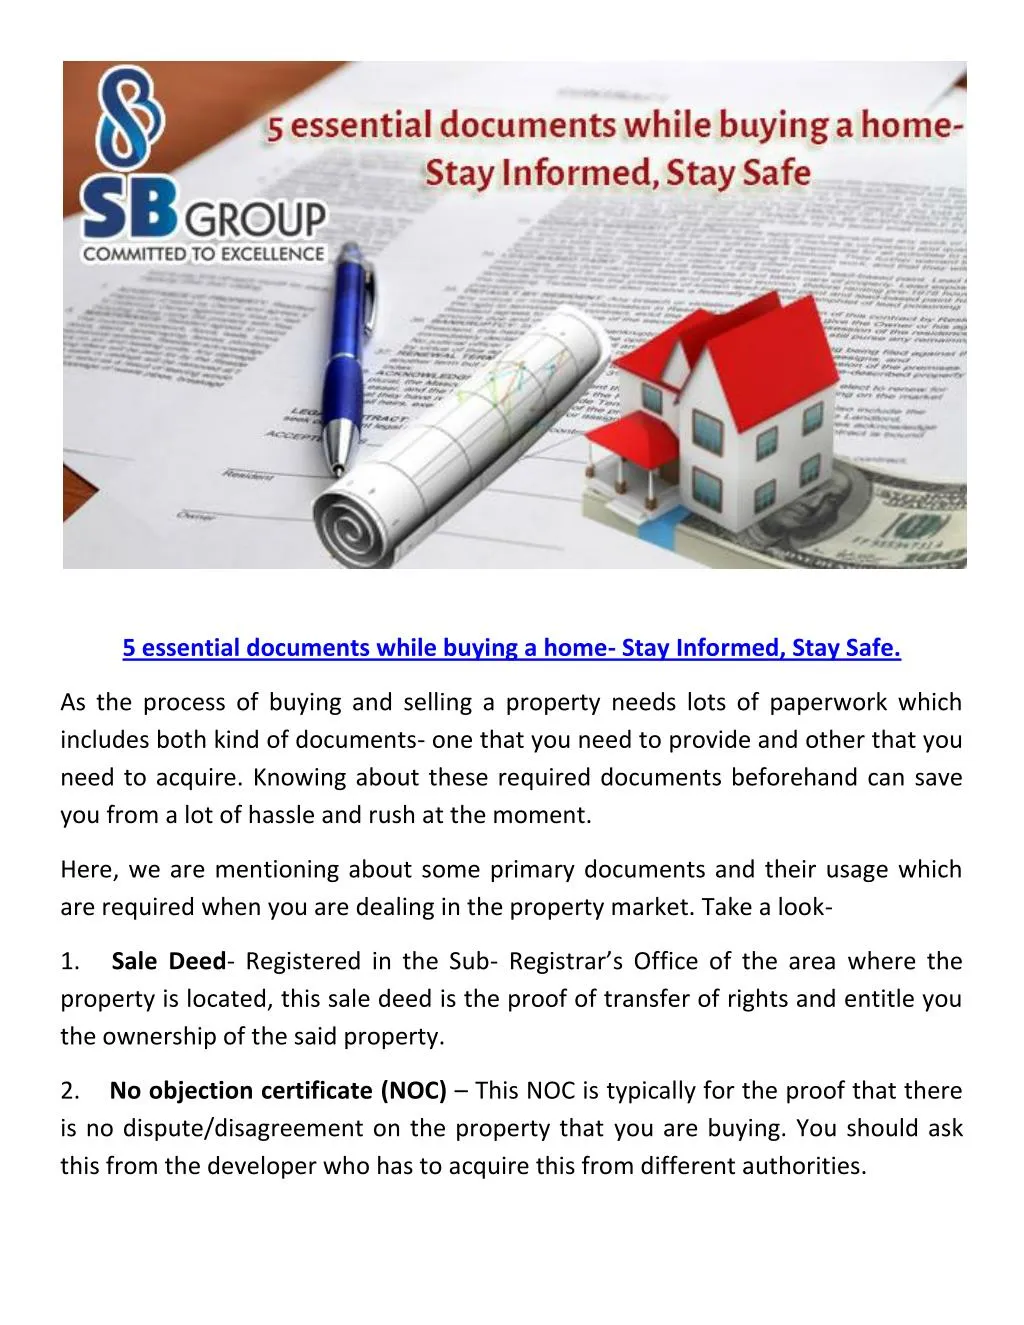 5 essential documents while buying a home stay